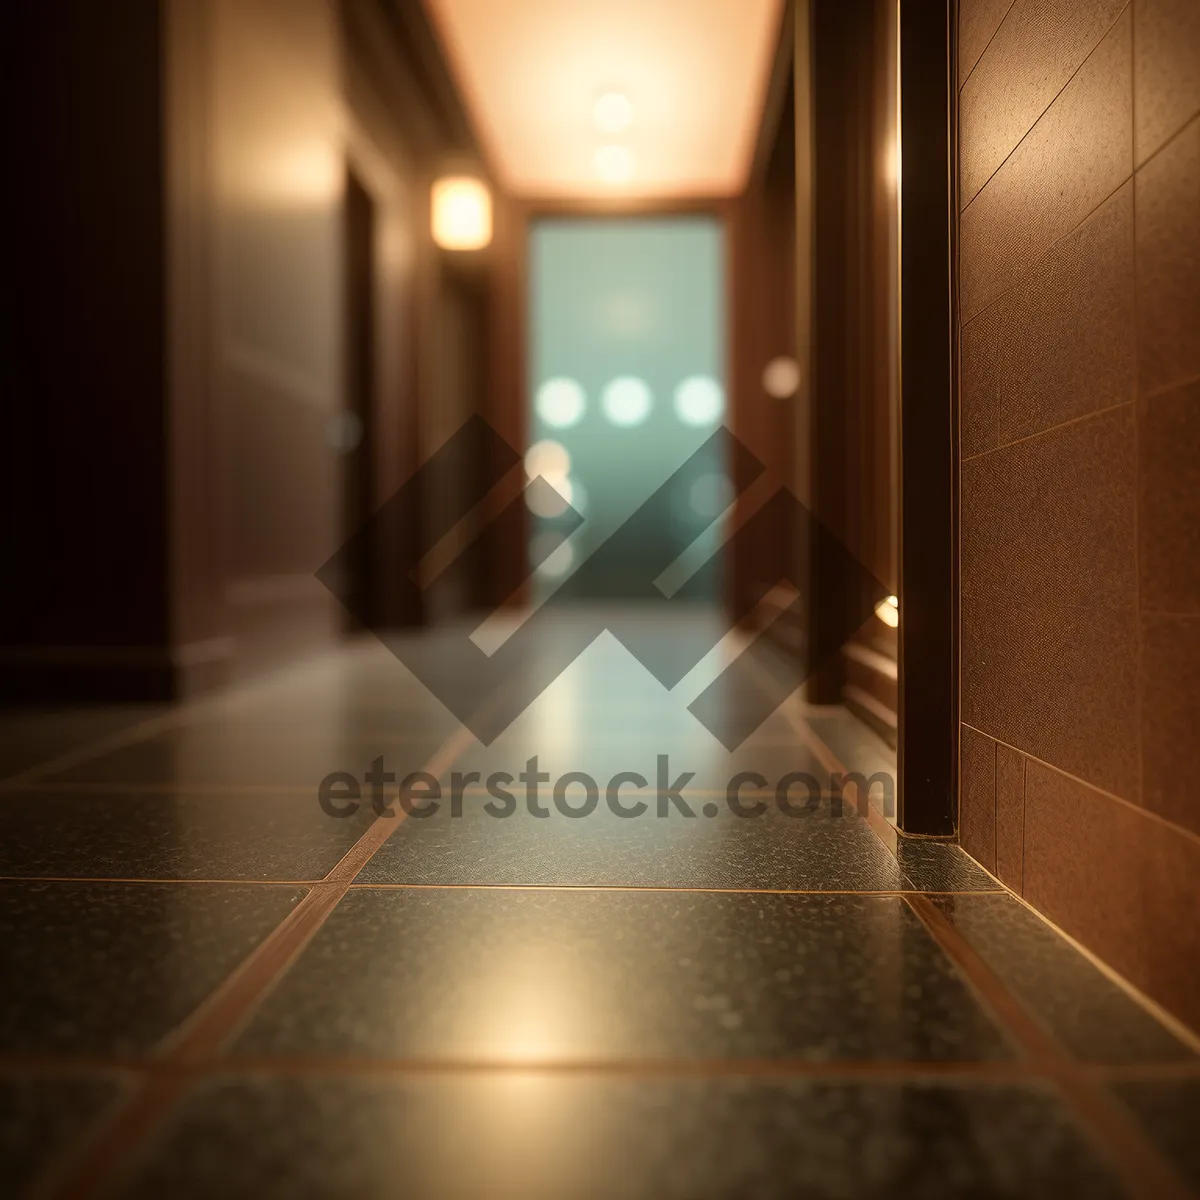 Picture of Modern Architectural Hallway with Illuminated Floor and Elevator